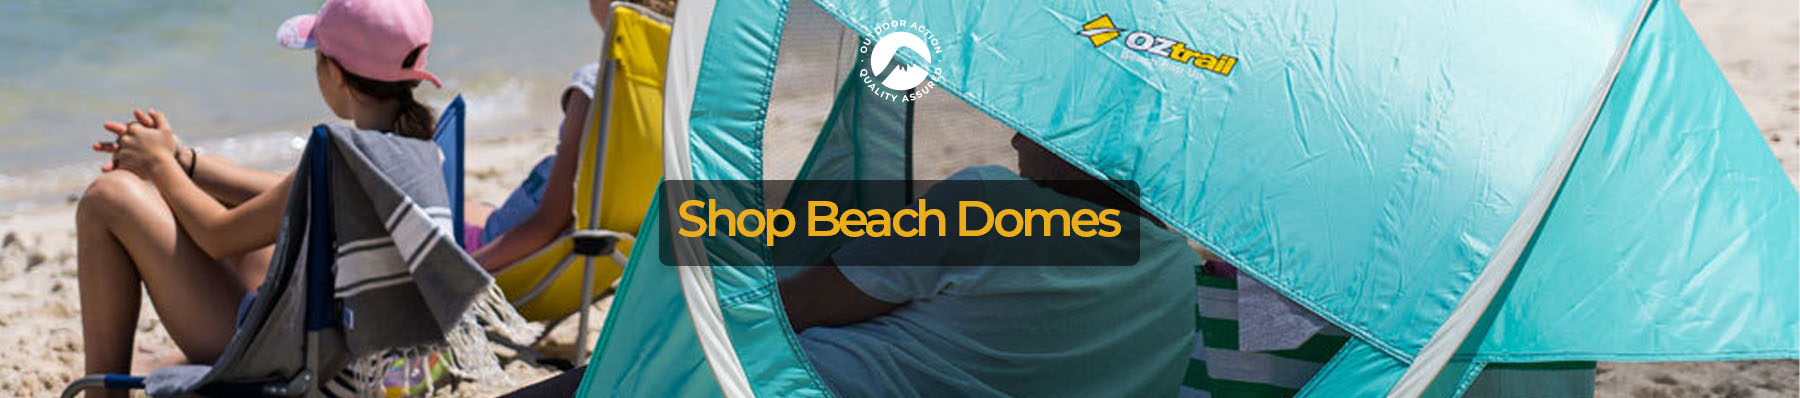 Shop Beach Domes online at Outdoor Action